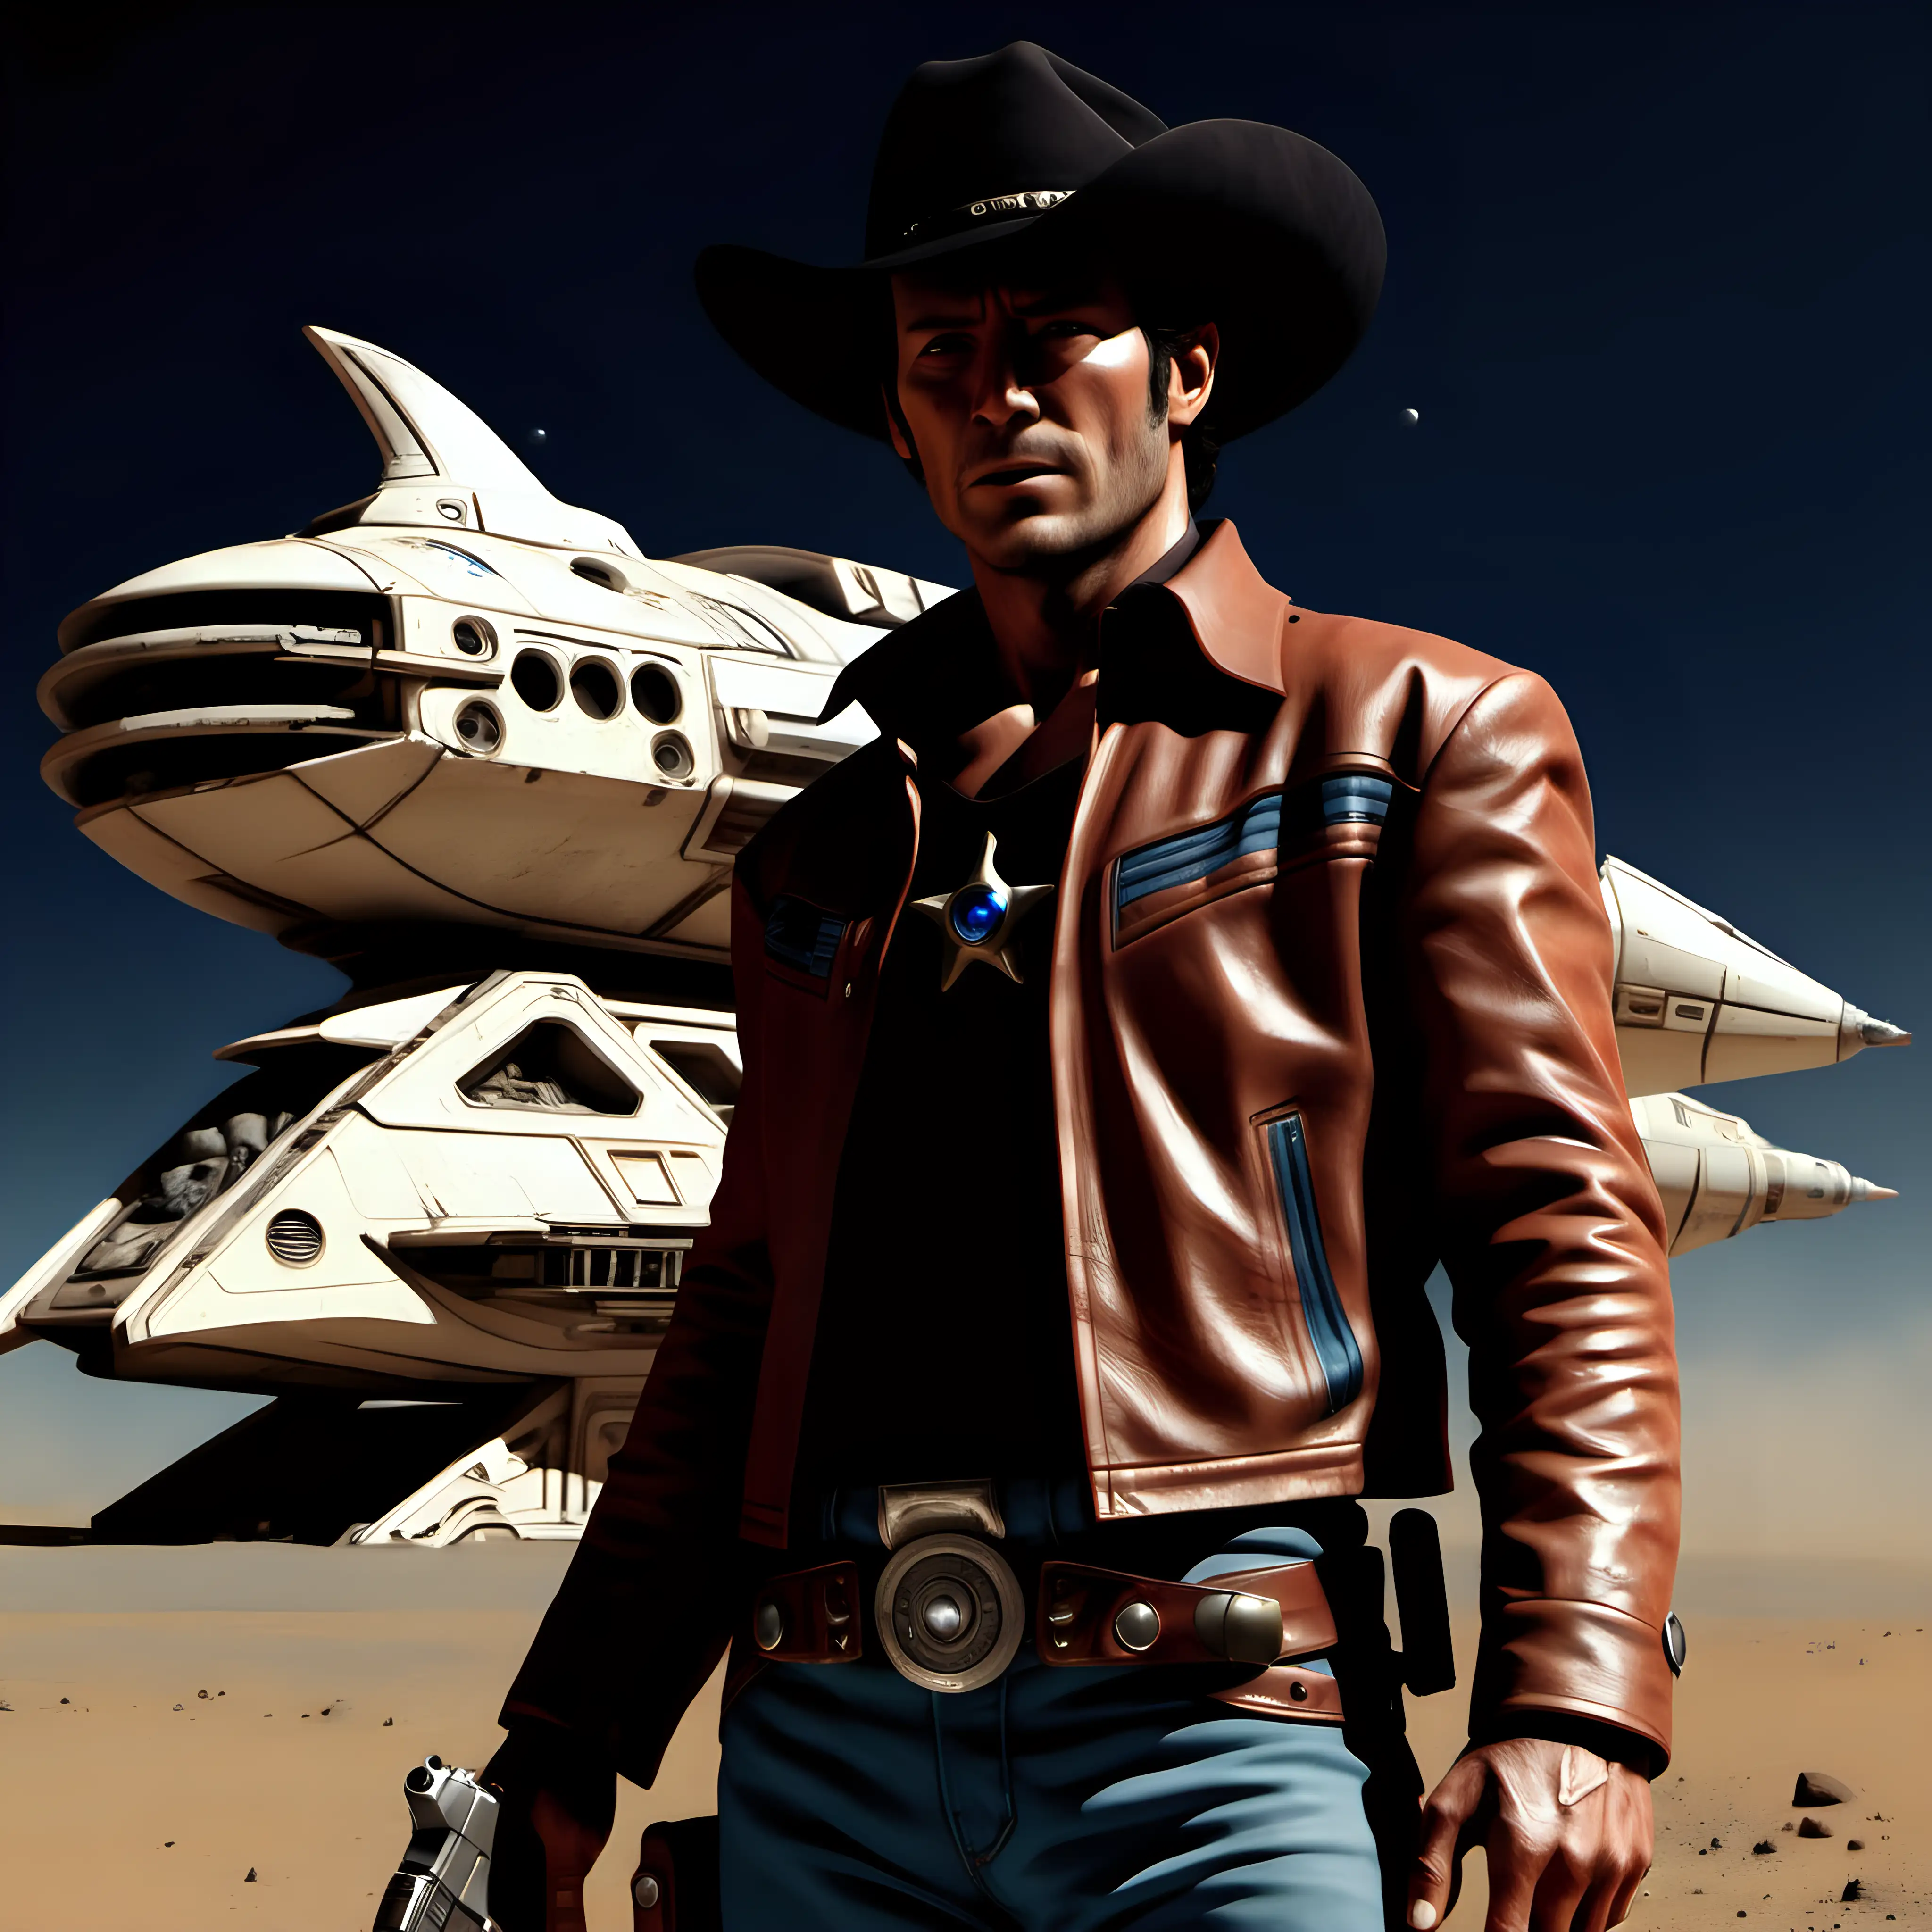 Space Cowboy Fastdraw PistolWielding Maverick in Front of Spaceship